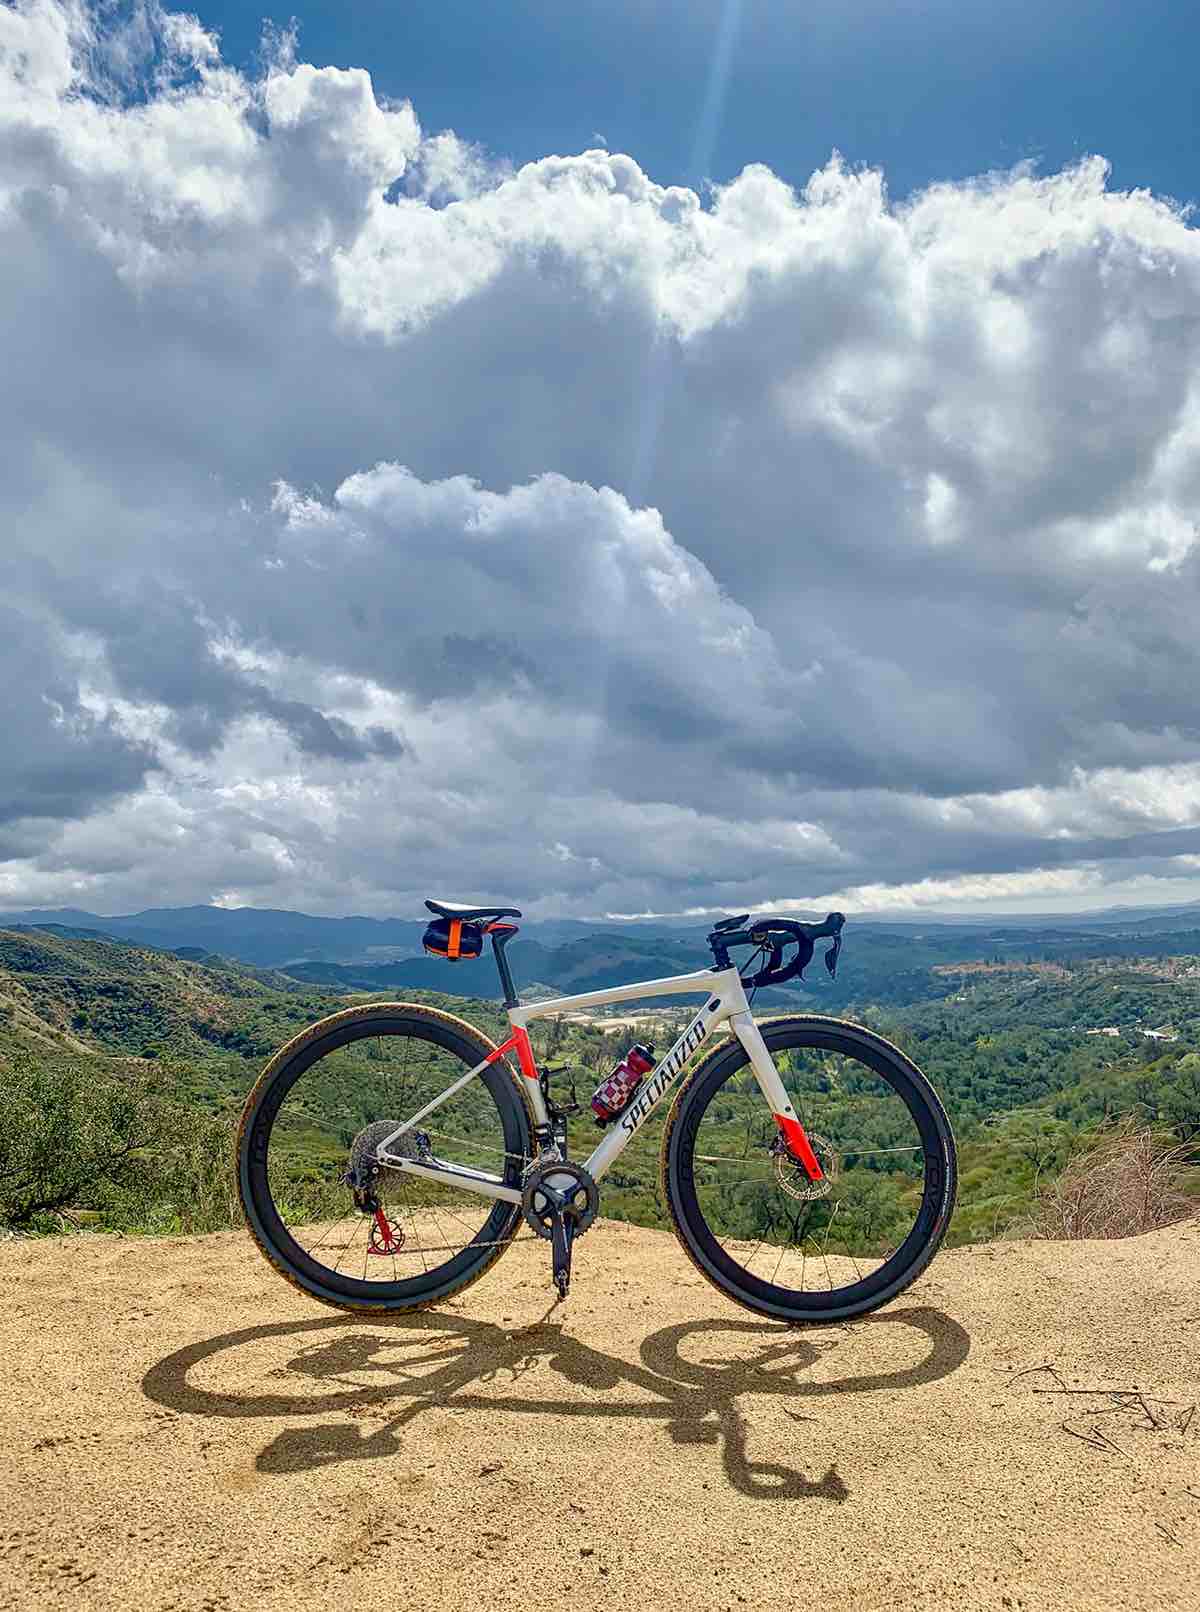 bikerumor pic of the day Trabuco Canyon, CA - Santiago Truck Trail entrance, a bicycle is along a dirt mountain ridge the a cloudy sky in the background and green hills beyond, the sky has opened up above the bicycle and it is lit up with bright sun